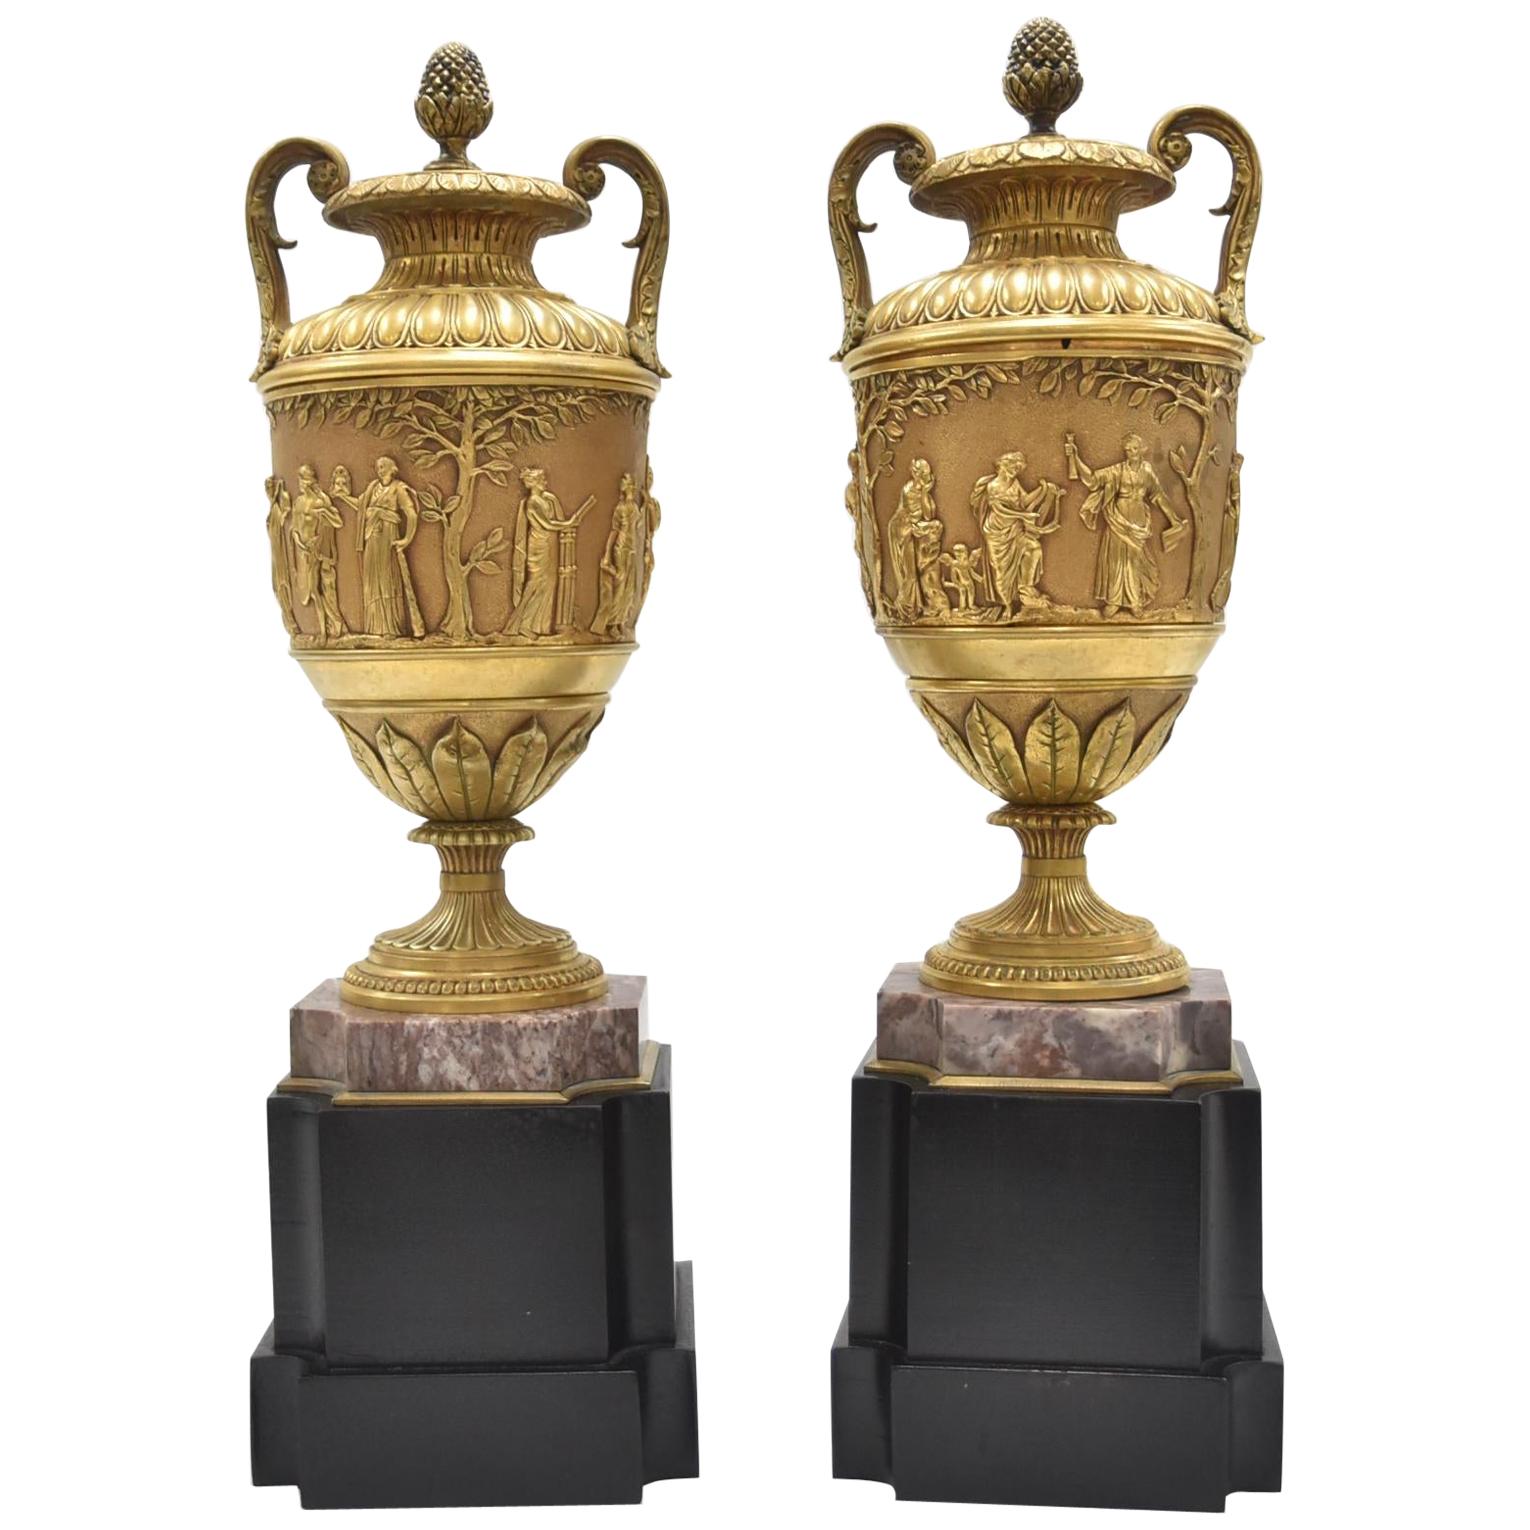 Fine Pair of 19th Century French Classical Gilt Bronze Urns, Barbedienne Style